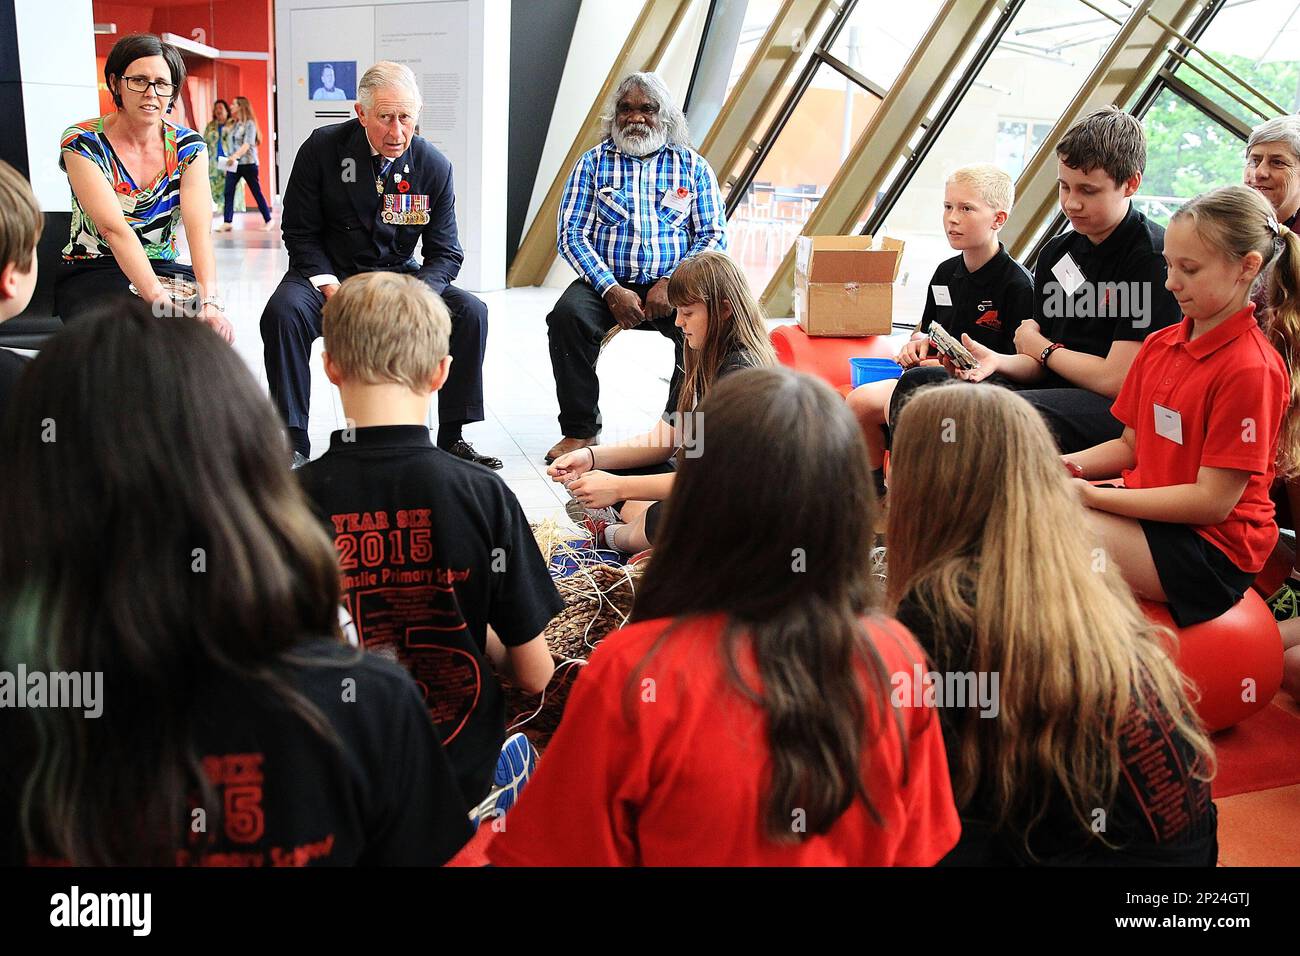 Britain's Prince Charles, second from left at top, speaks with children who are doing a craft with traditional and master basket maker Abe Muriata, top right, from the Girramay aboriginal tribe during a visit to the National Museum of Australia in Canberra, Australia, Wednesday, Nov. 11, 2015. Prince Charles and his wife Camilla, the Duchess of Cornwall, are on a six-day visit to Australia. (Stefan Postles/Pool via AP) Stock Photo